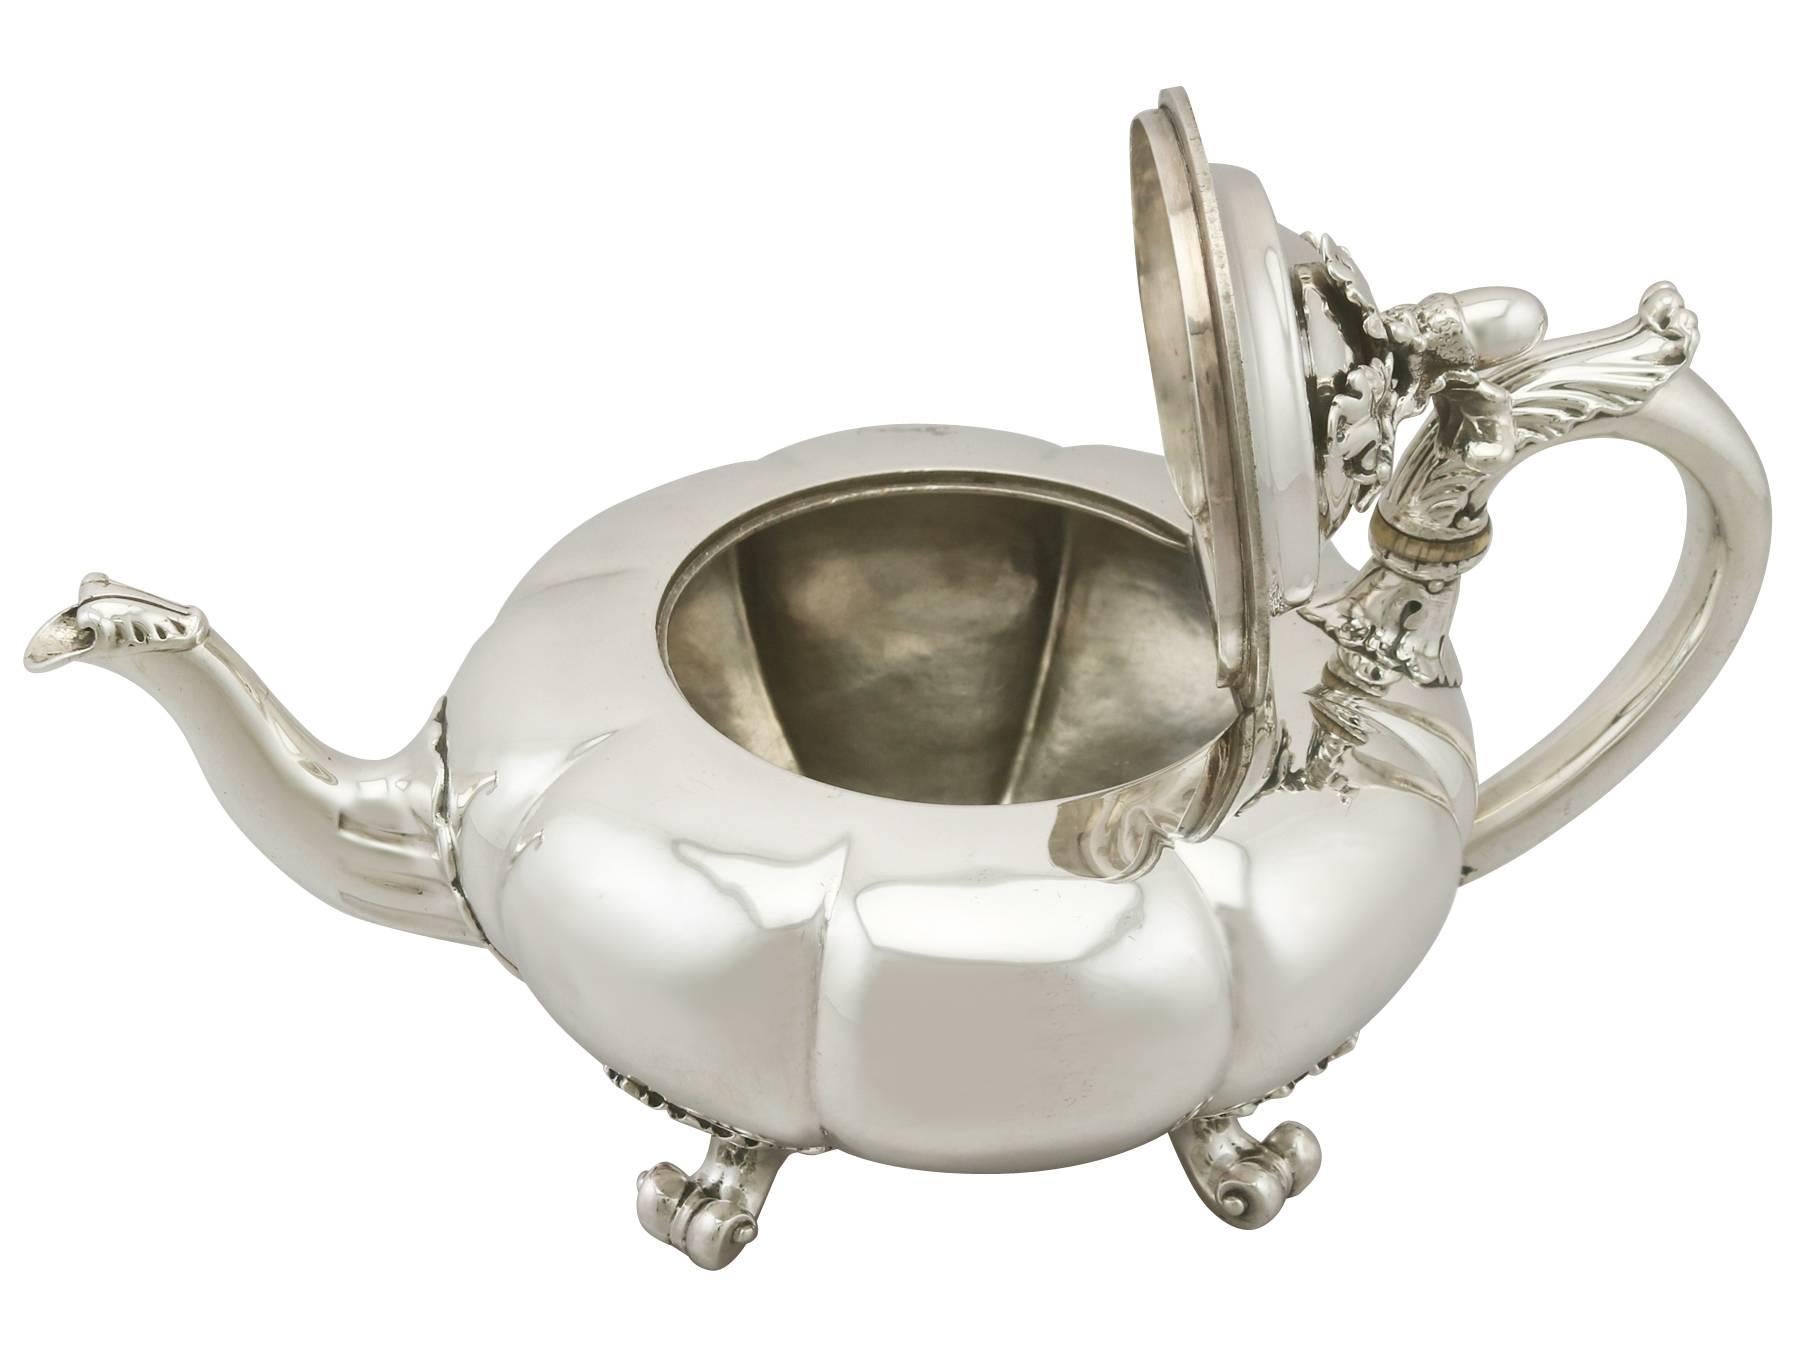 An exceptional, fine and impressive antique William IV English sterling silver teapot made by Paul Storr; an addition to our collectable silver teaware collection

This exceptional antique William IV sterling silver teapot has a plain rounded